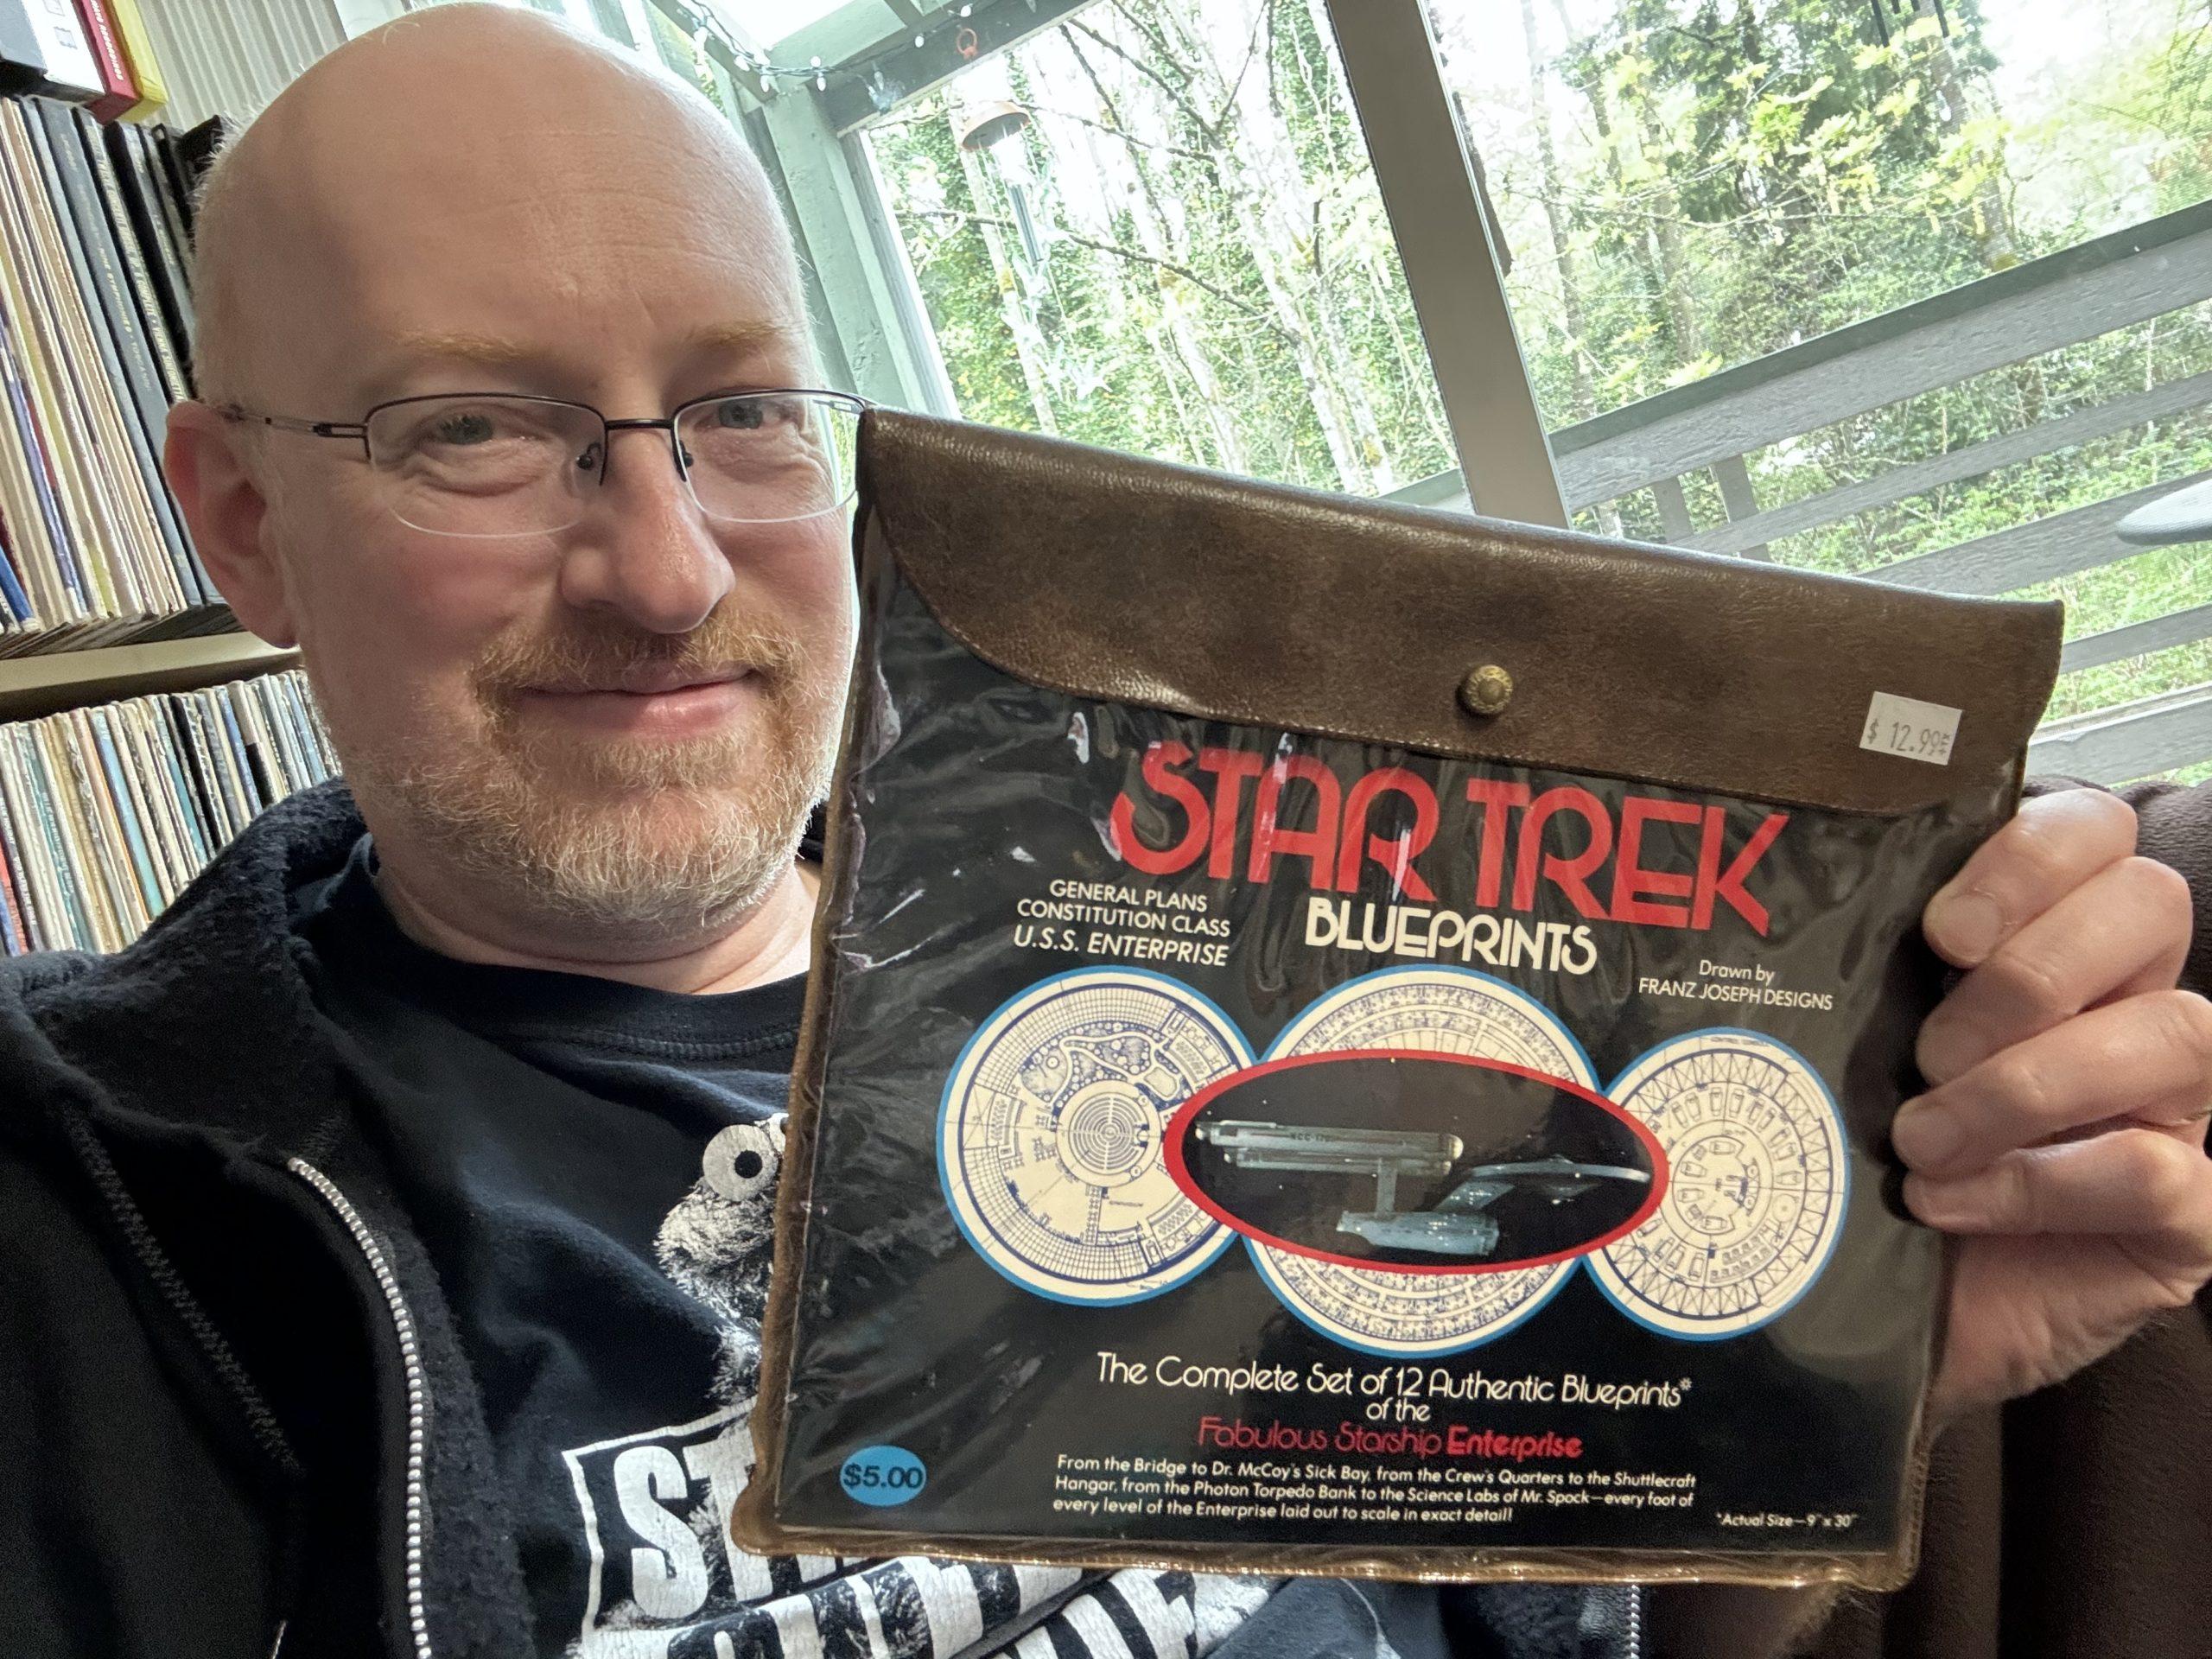 Me holding a brown faux-leather pouch with a clear front, which contains the classic Star Trek blueprints of the original series USS Enterprise.